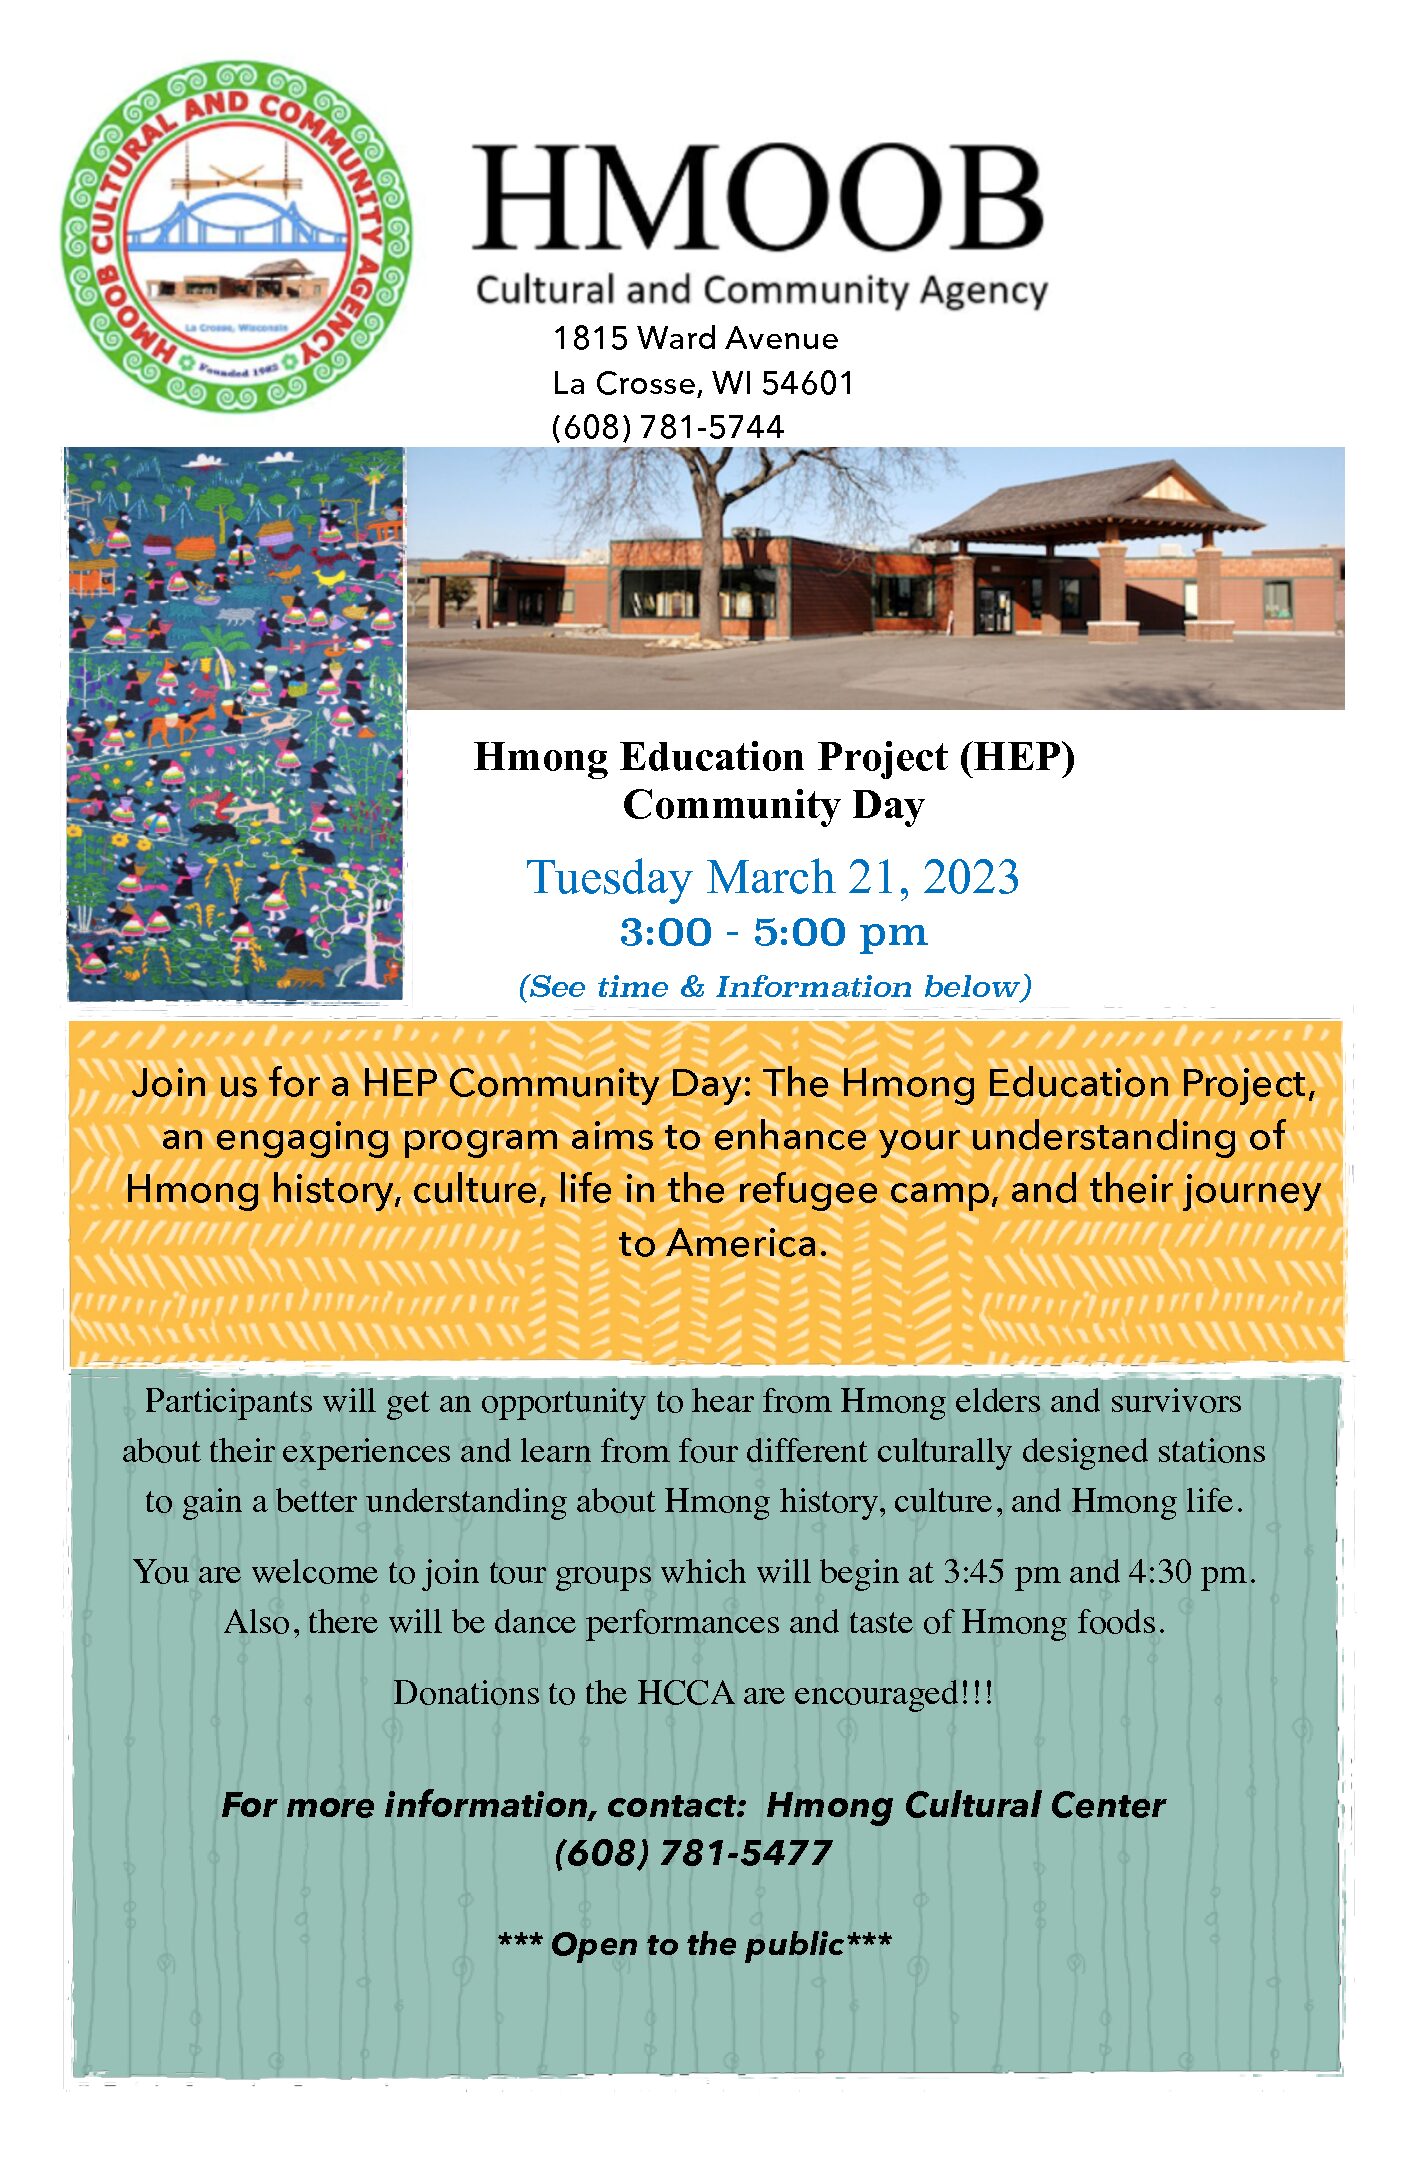 Hmong Education Project (HEP) Community Day